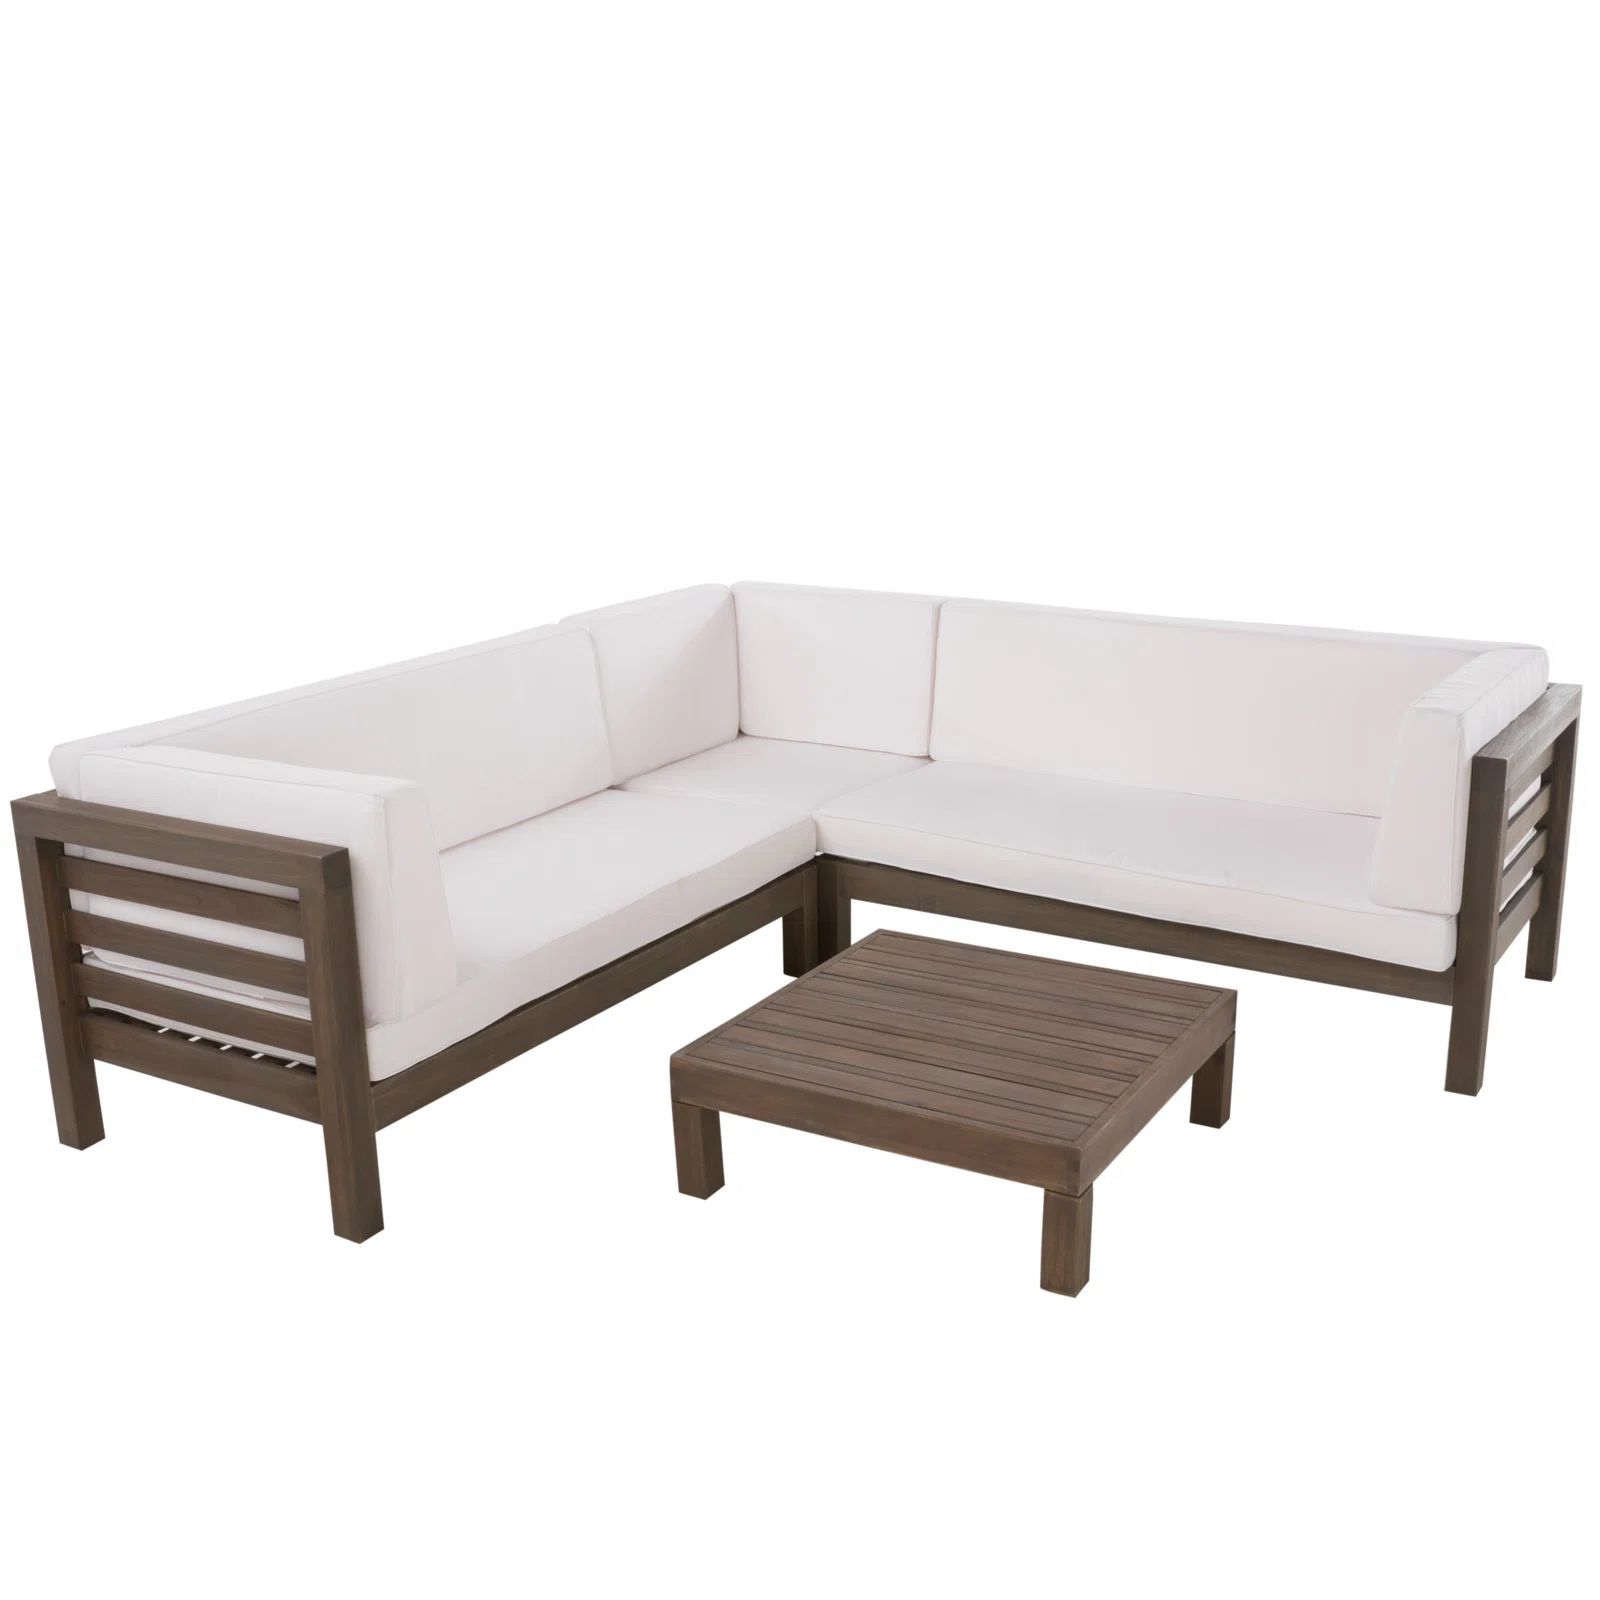 Adharsh Solid Wood 5 - Person Seating Group with Cushions | Wayfair North America